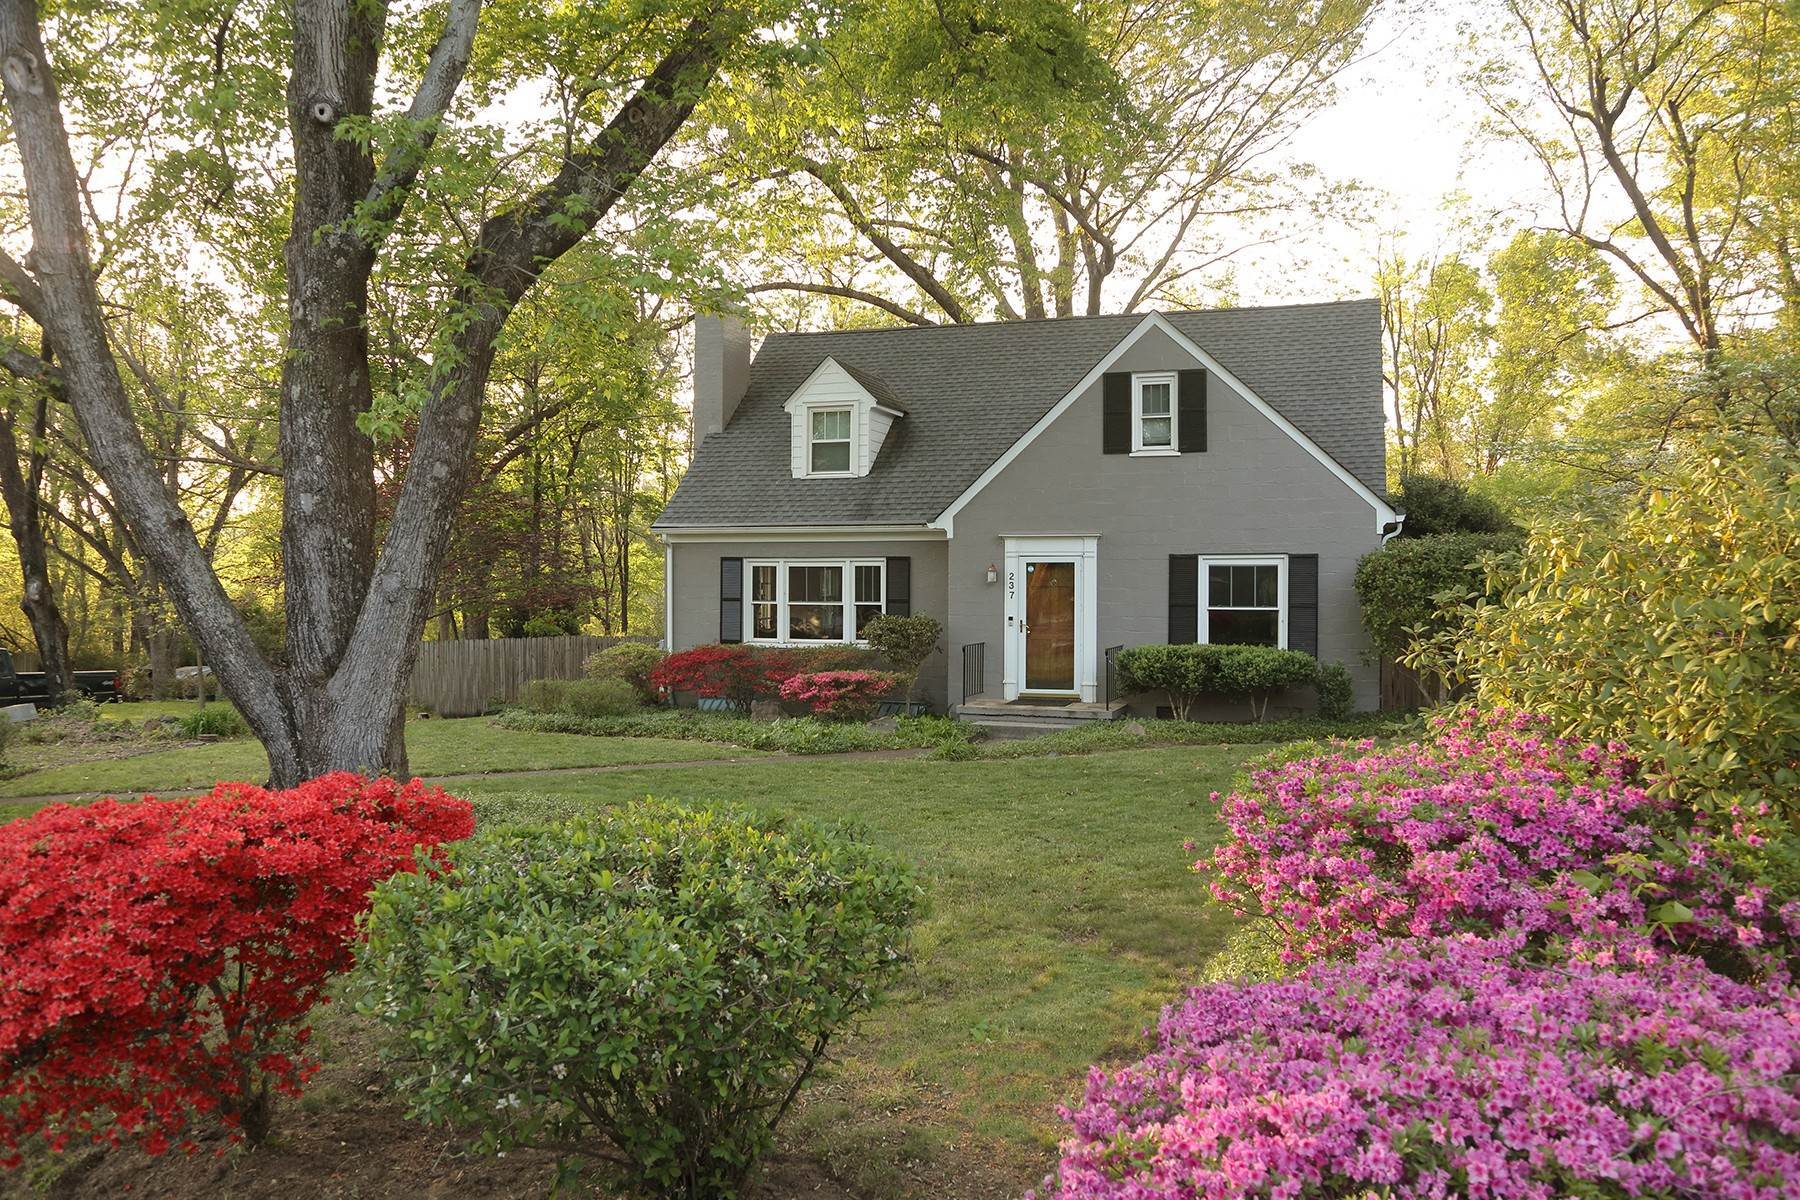 Single Family Homes for Sale at Charming UVA Cape Cod 237 Stribling Ave Charlottesville, Virginia 22901 United States